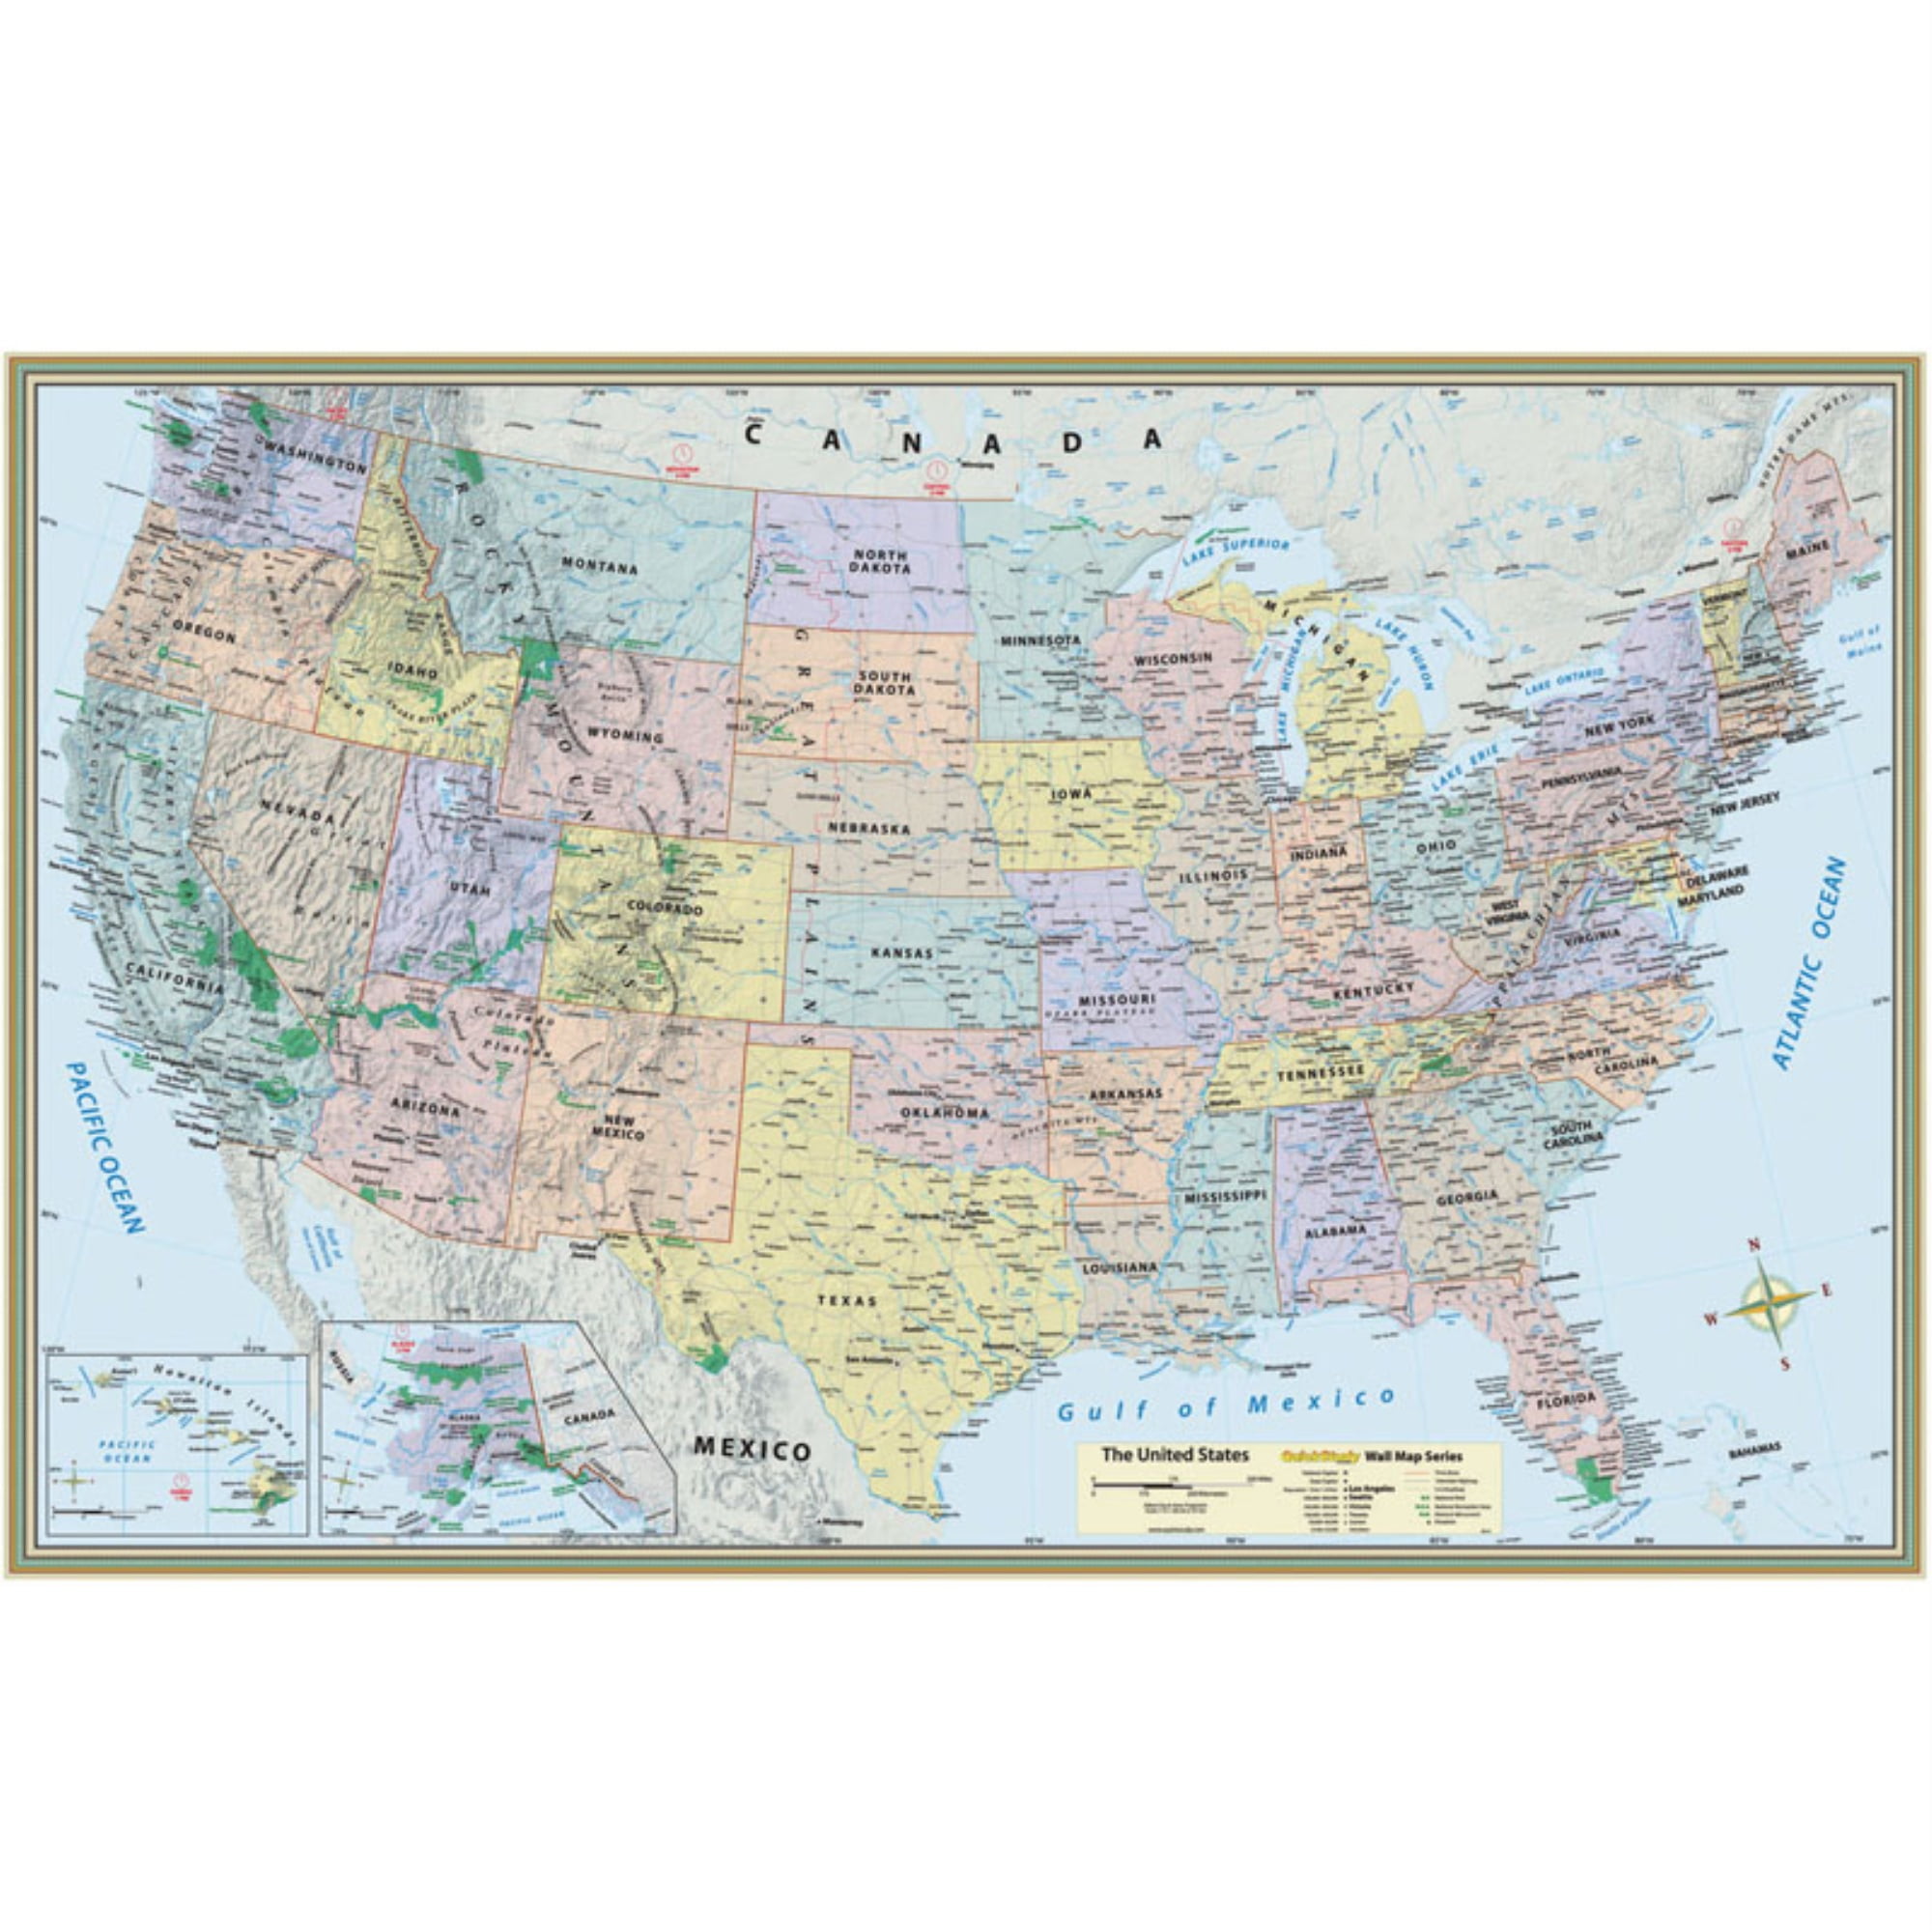 WORLD MAP BY SMILE TRAIN - 32" X 22" FREE SHIPPING MULTI-COLORED "NEW" 